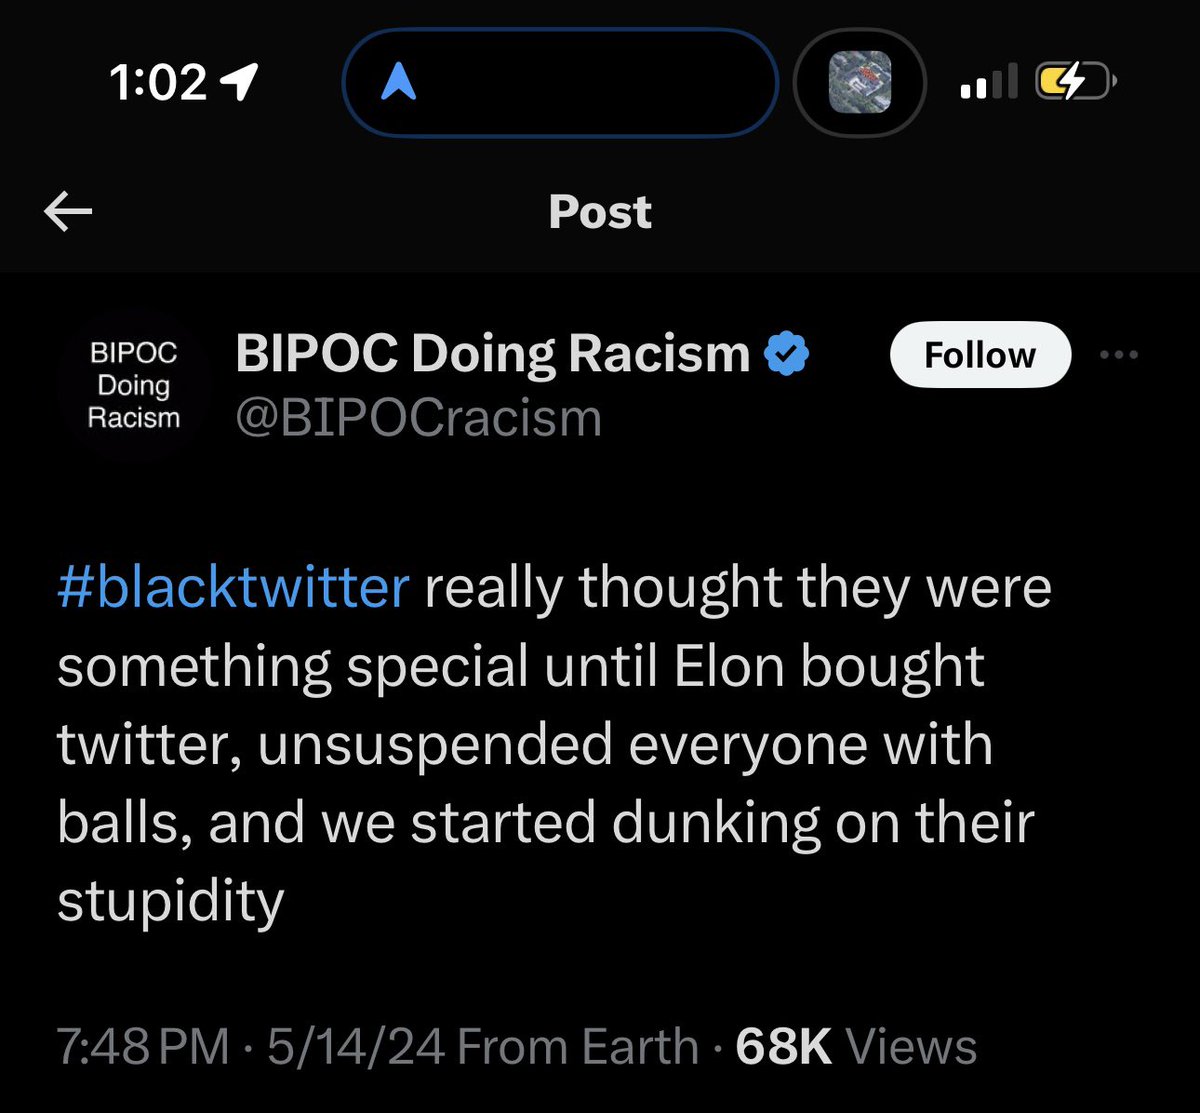 🤣🤣🤣 dunkin on who ?! ws ain’t accomplishing nothing on X, the popular ones grifting irl and makin $ off y’all dumb  a**** bih nobody know you, or the other 🐷s @BIPOCracism  “dunk” offline🤡 Honestly #BlackAmericans  run this bih, y’all nothing without mentioning Black ppl